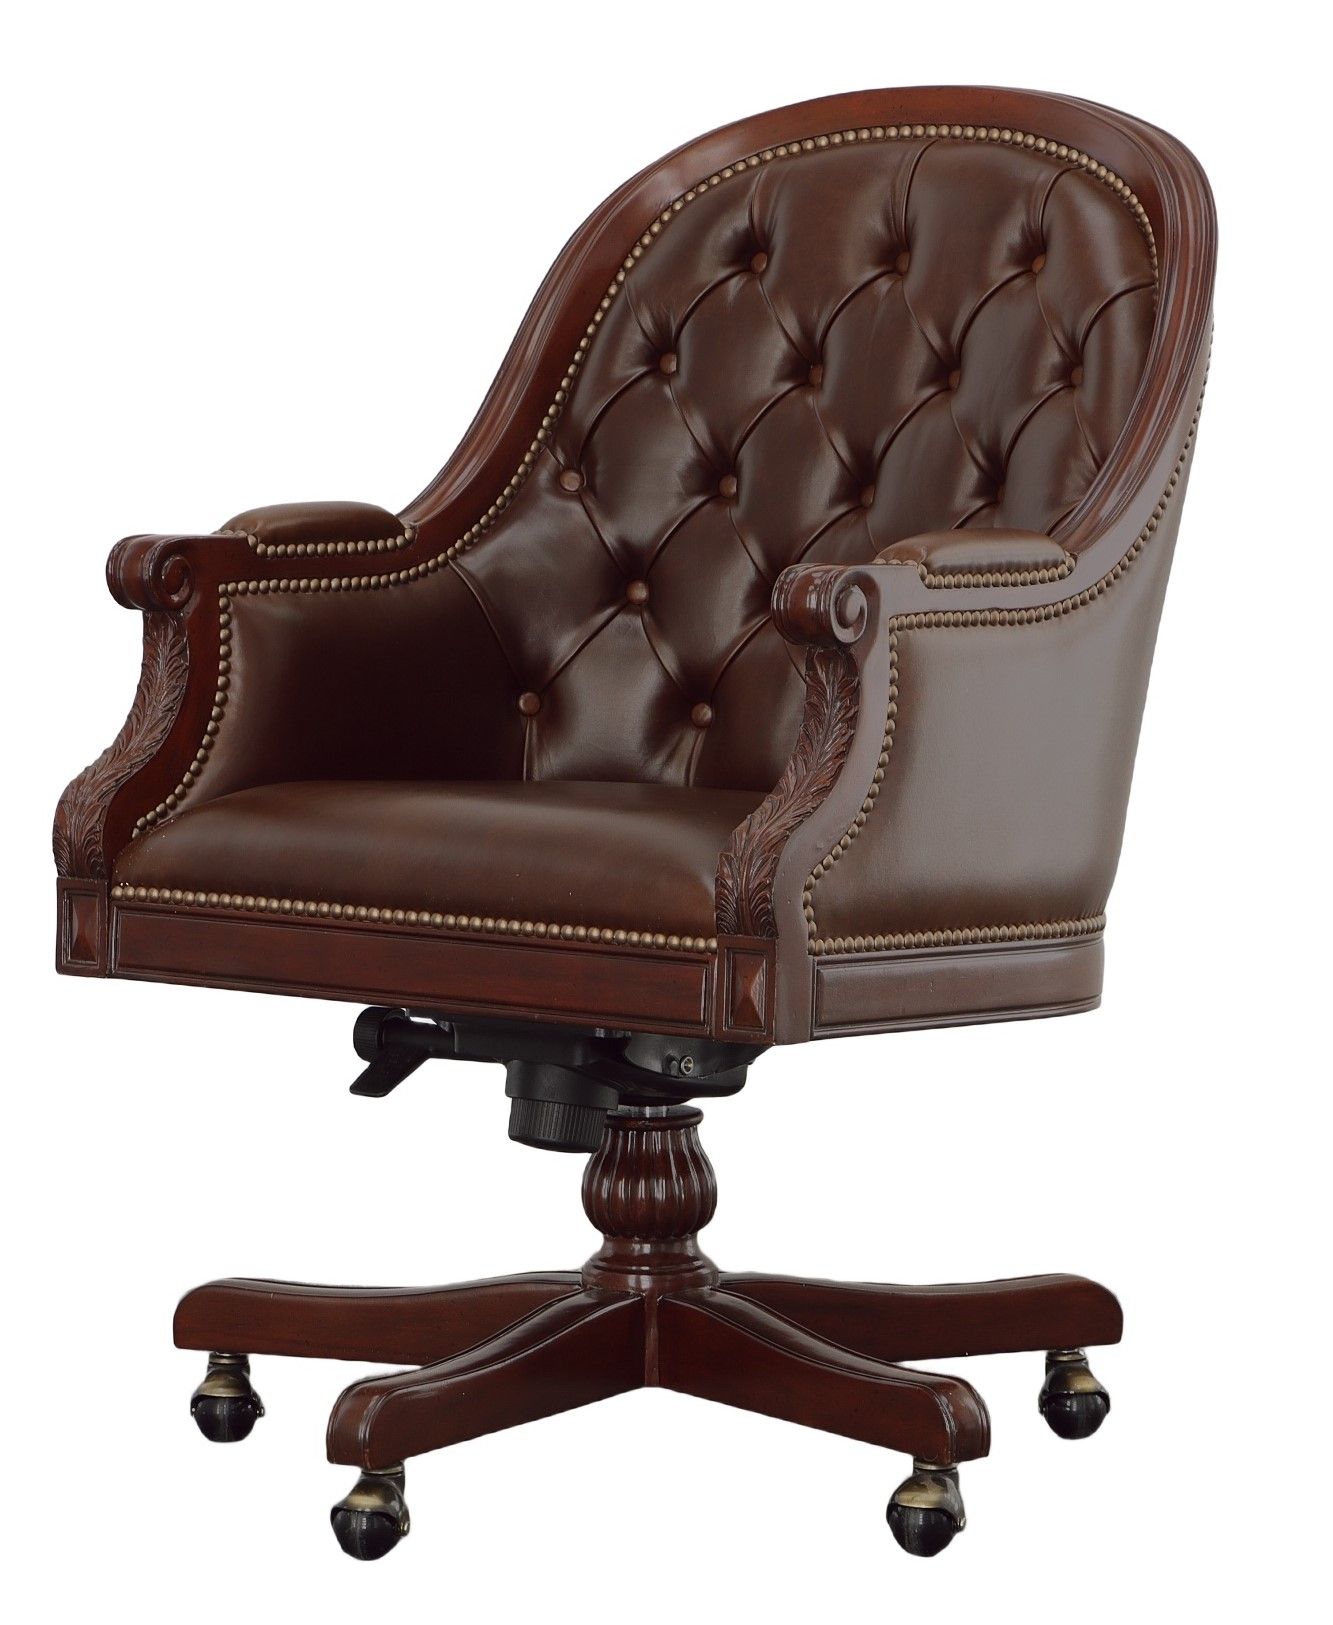 Chesterfield style buttoned and tufted brown leather desk chair with mahogany frame, fully adjustable and with castors